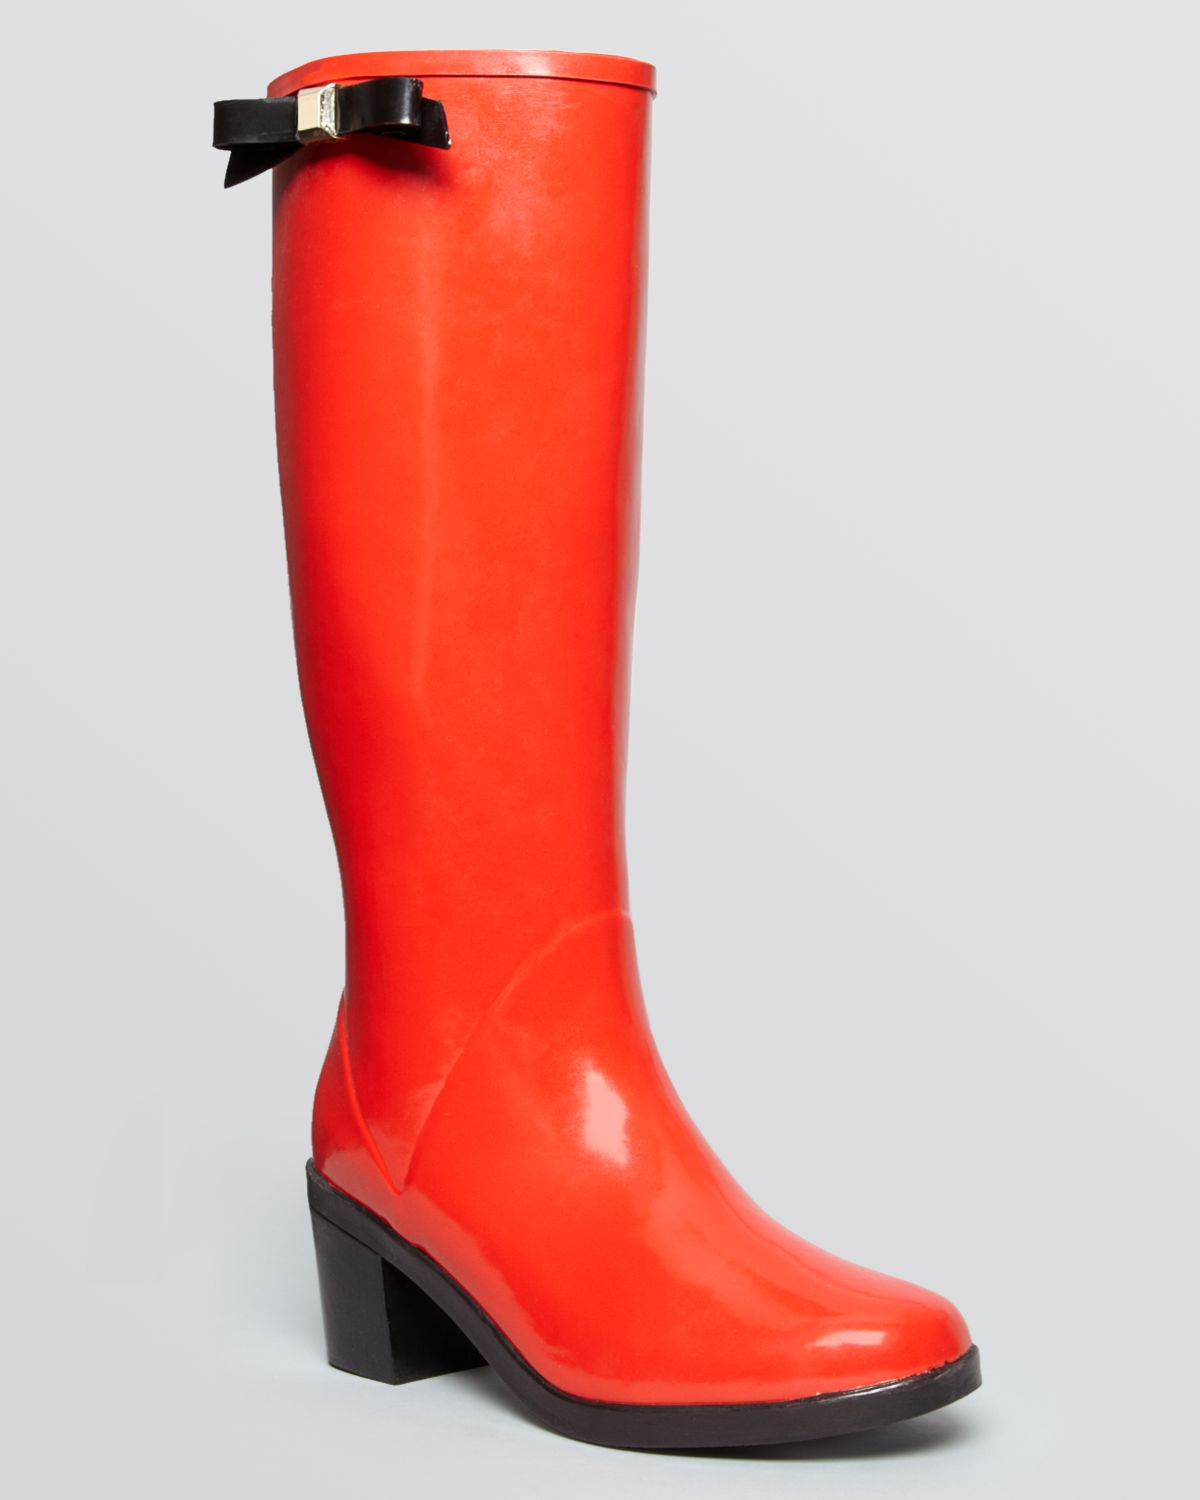 Kate spade new york Rain Boots - Romi Bow in Red | Lyst